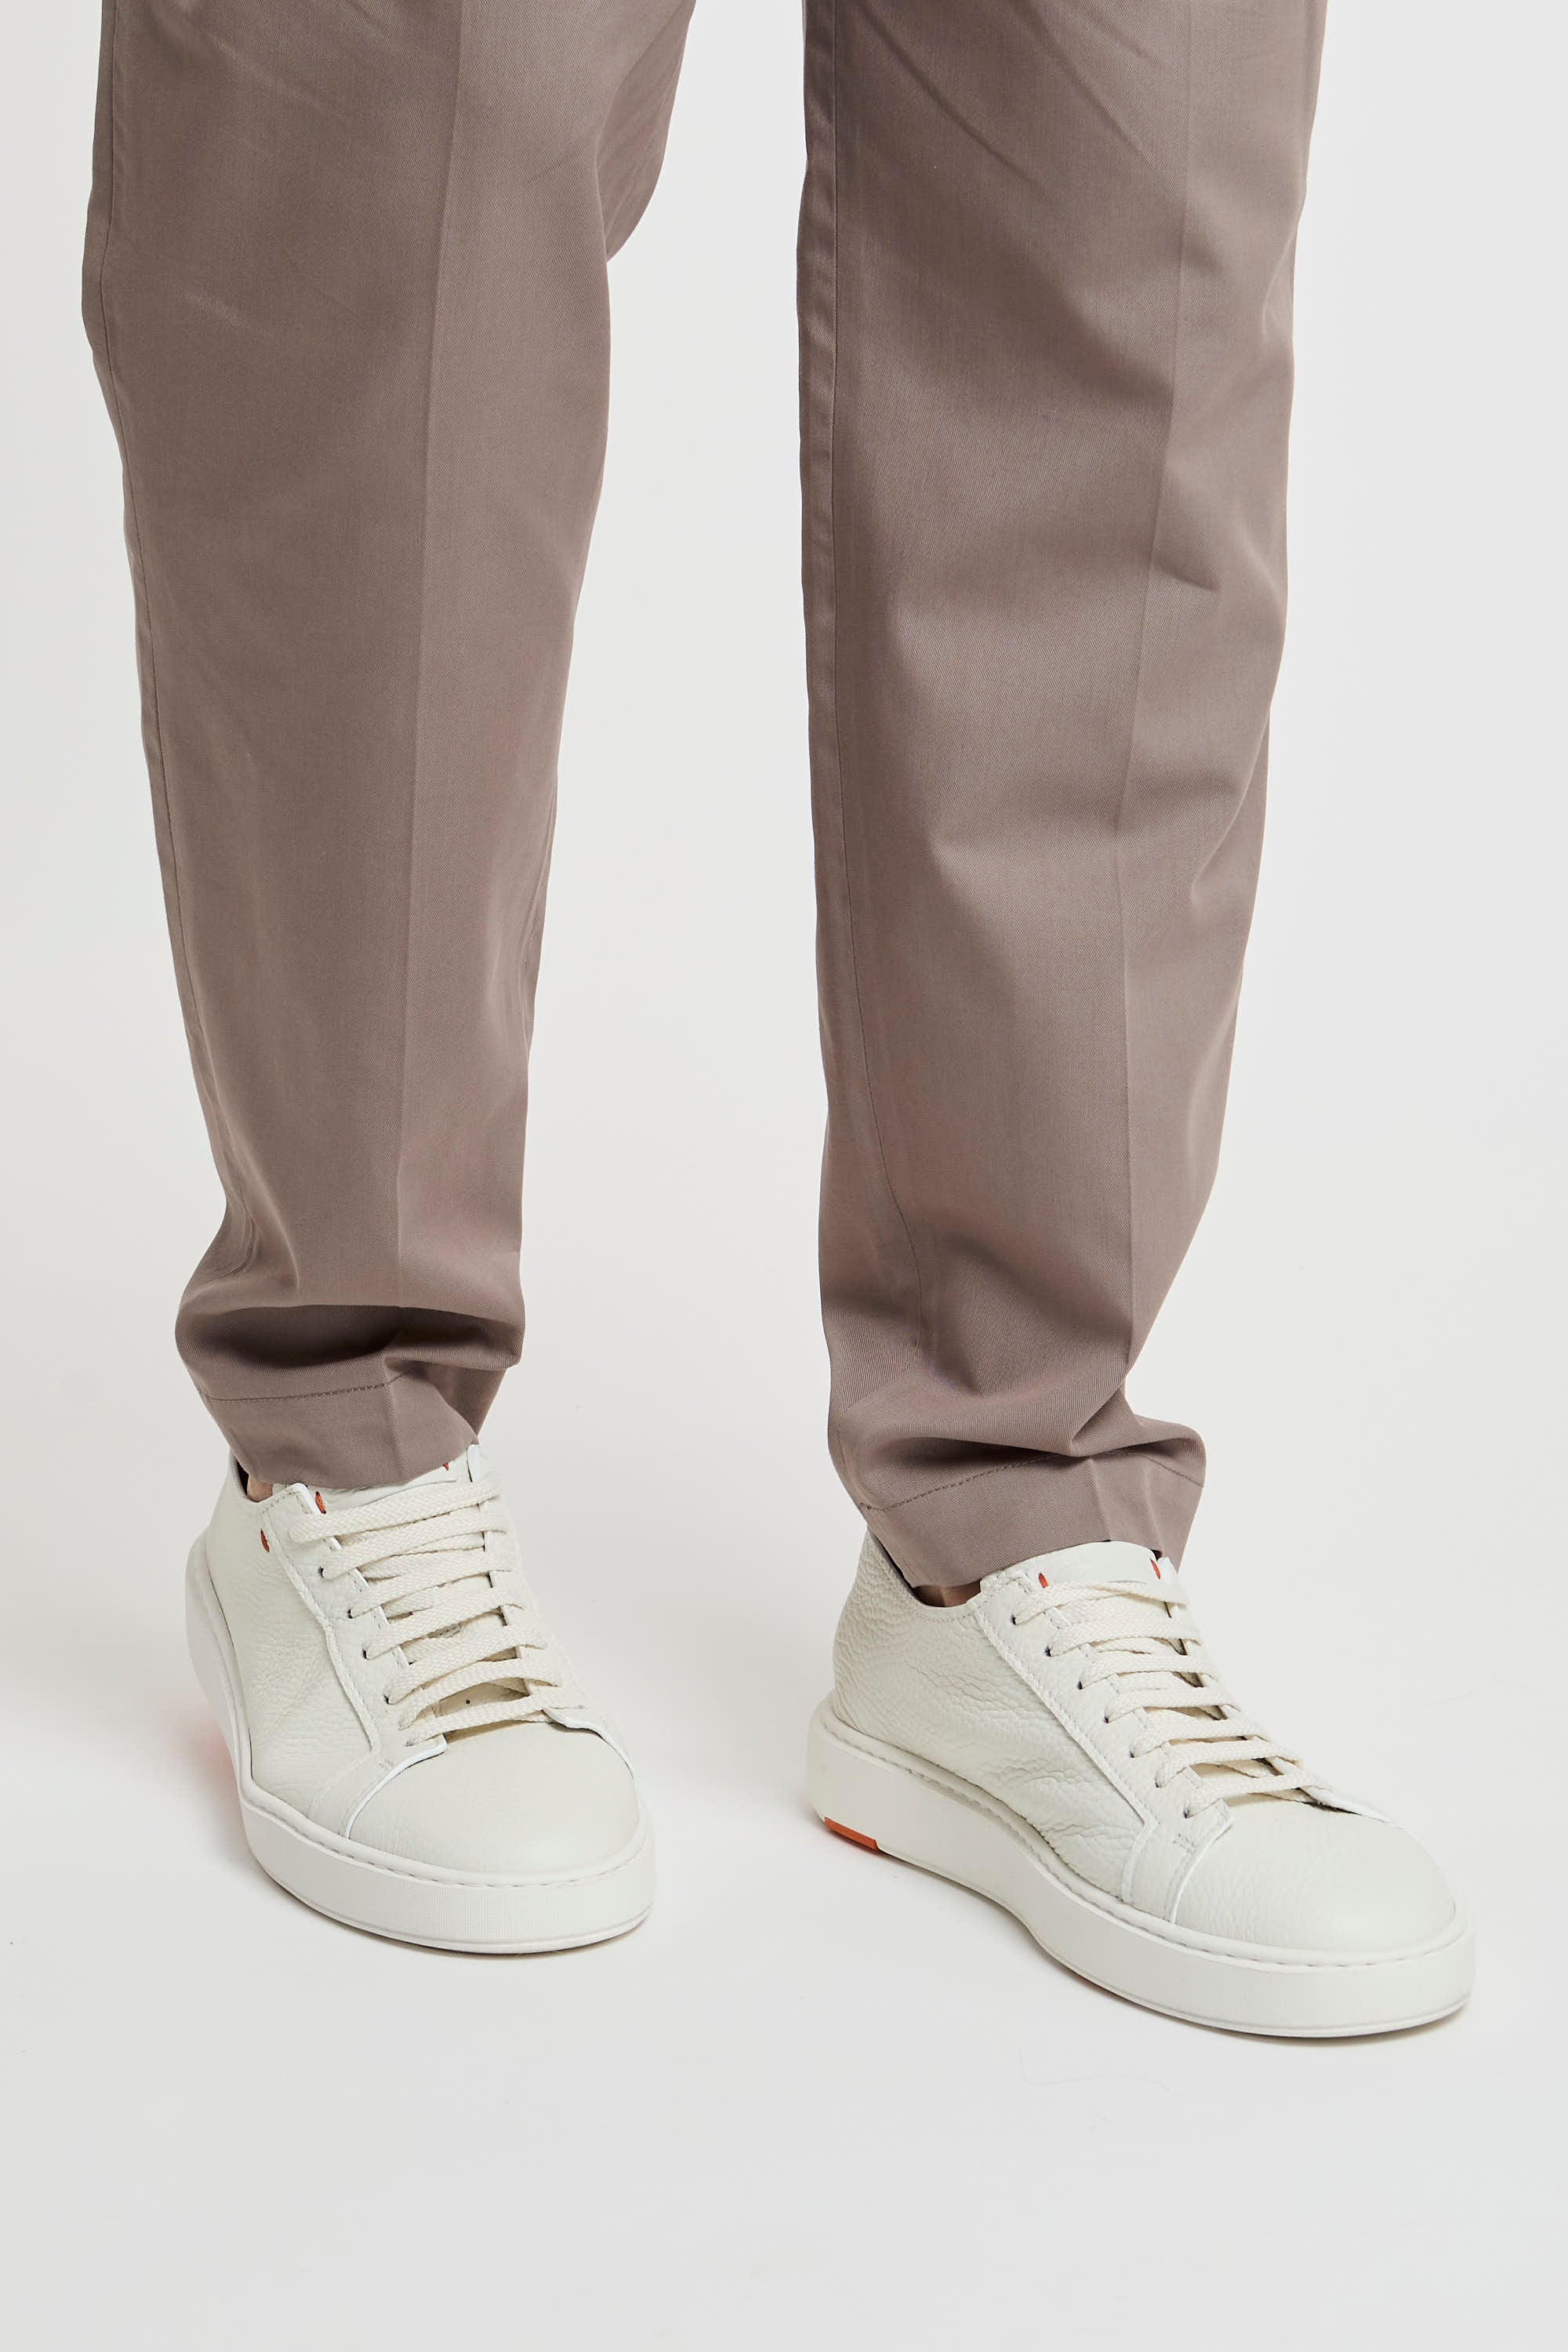 Paolo Pecora Cotton Blend Chino Trousers in Taupe-7